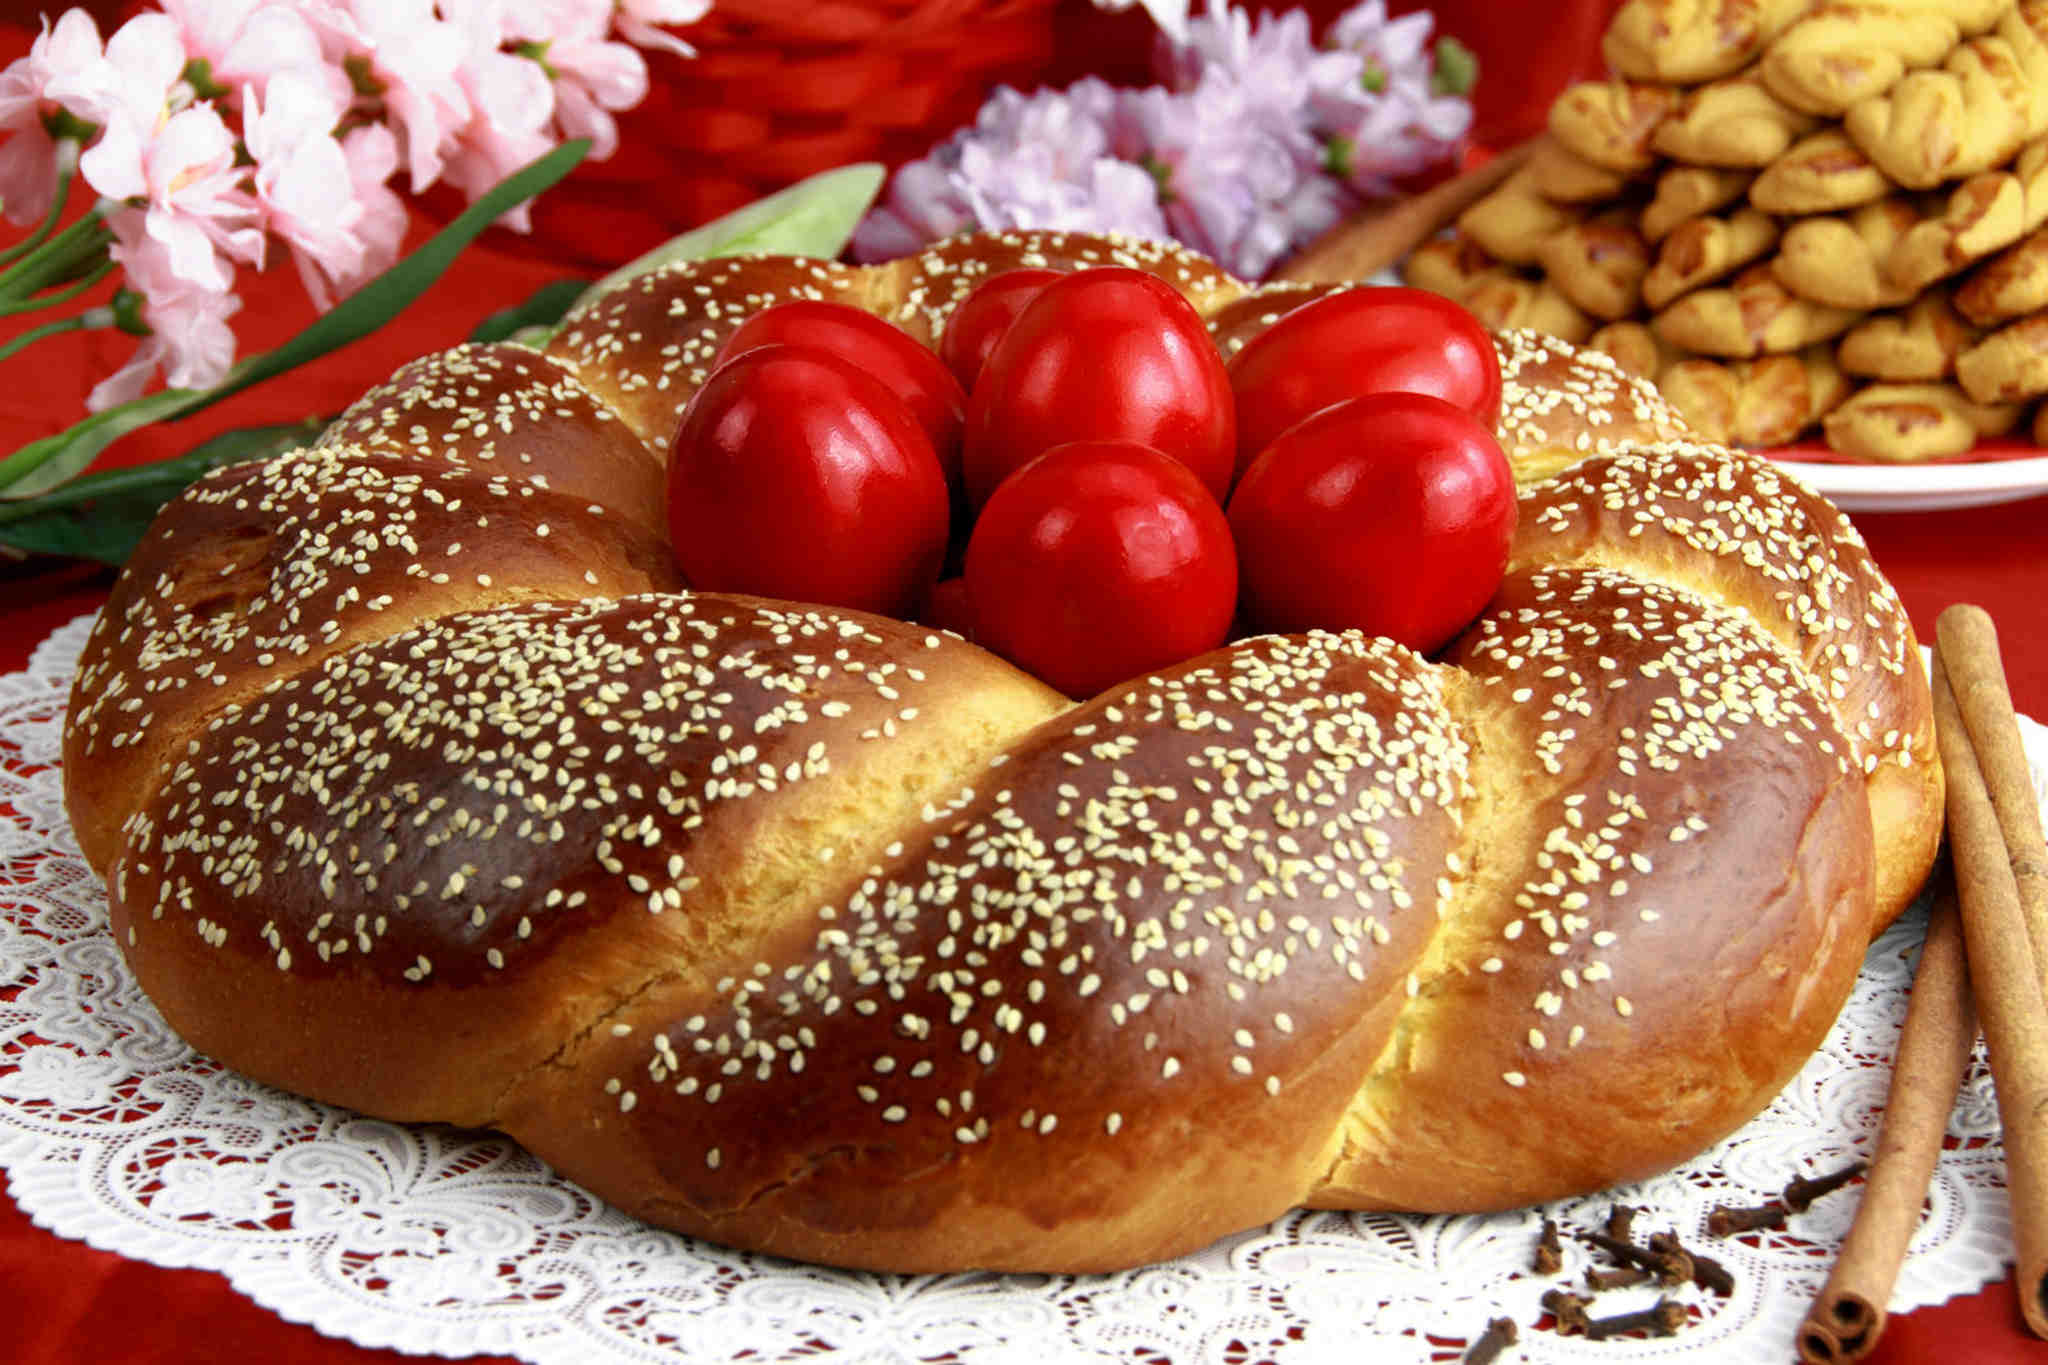 GREEK ORTHODOX EASTER AT THE MISTRAL